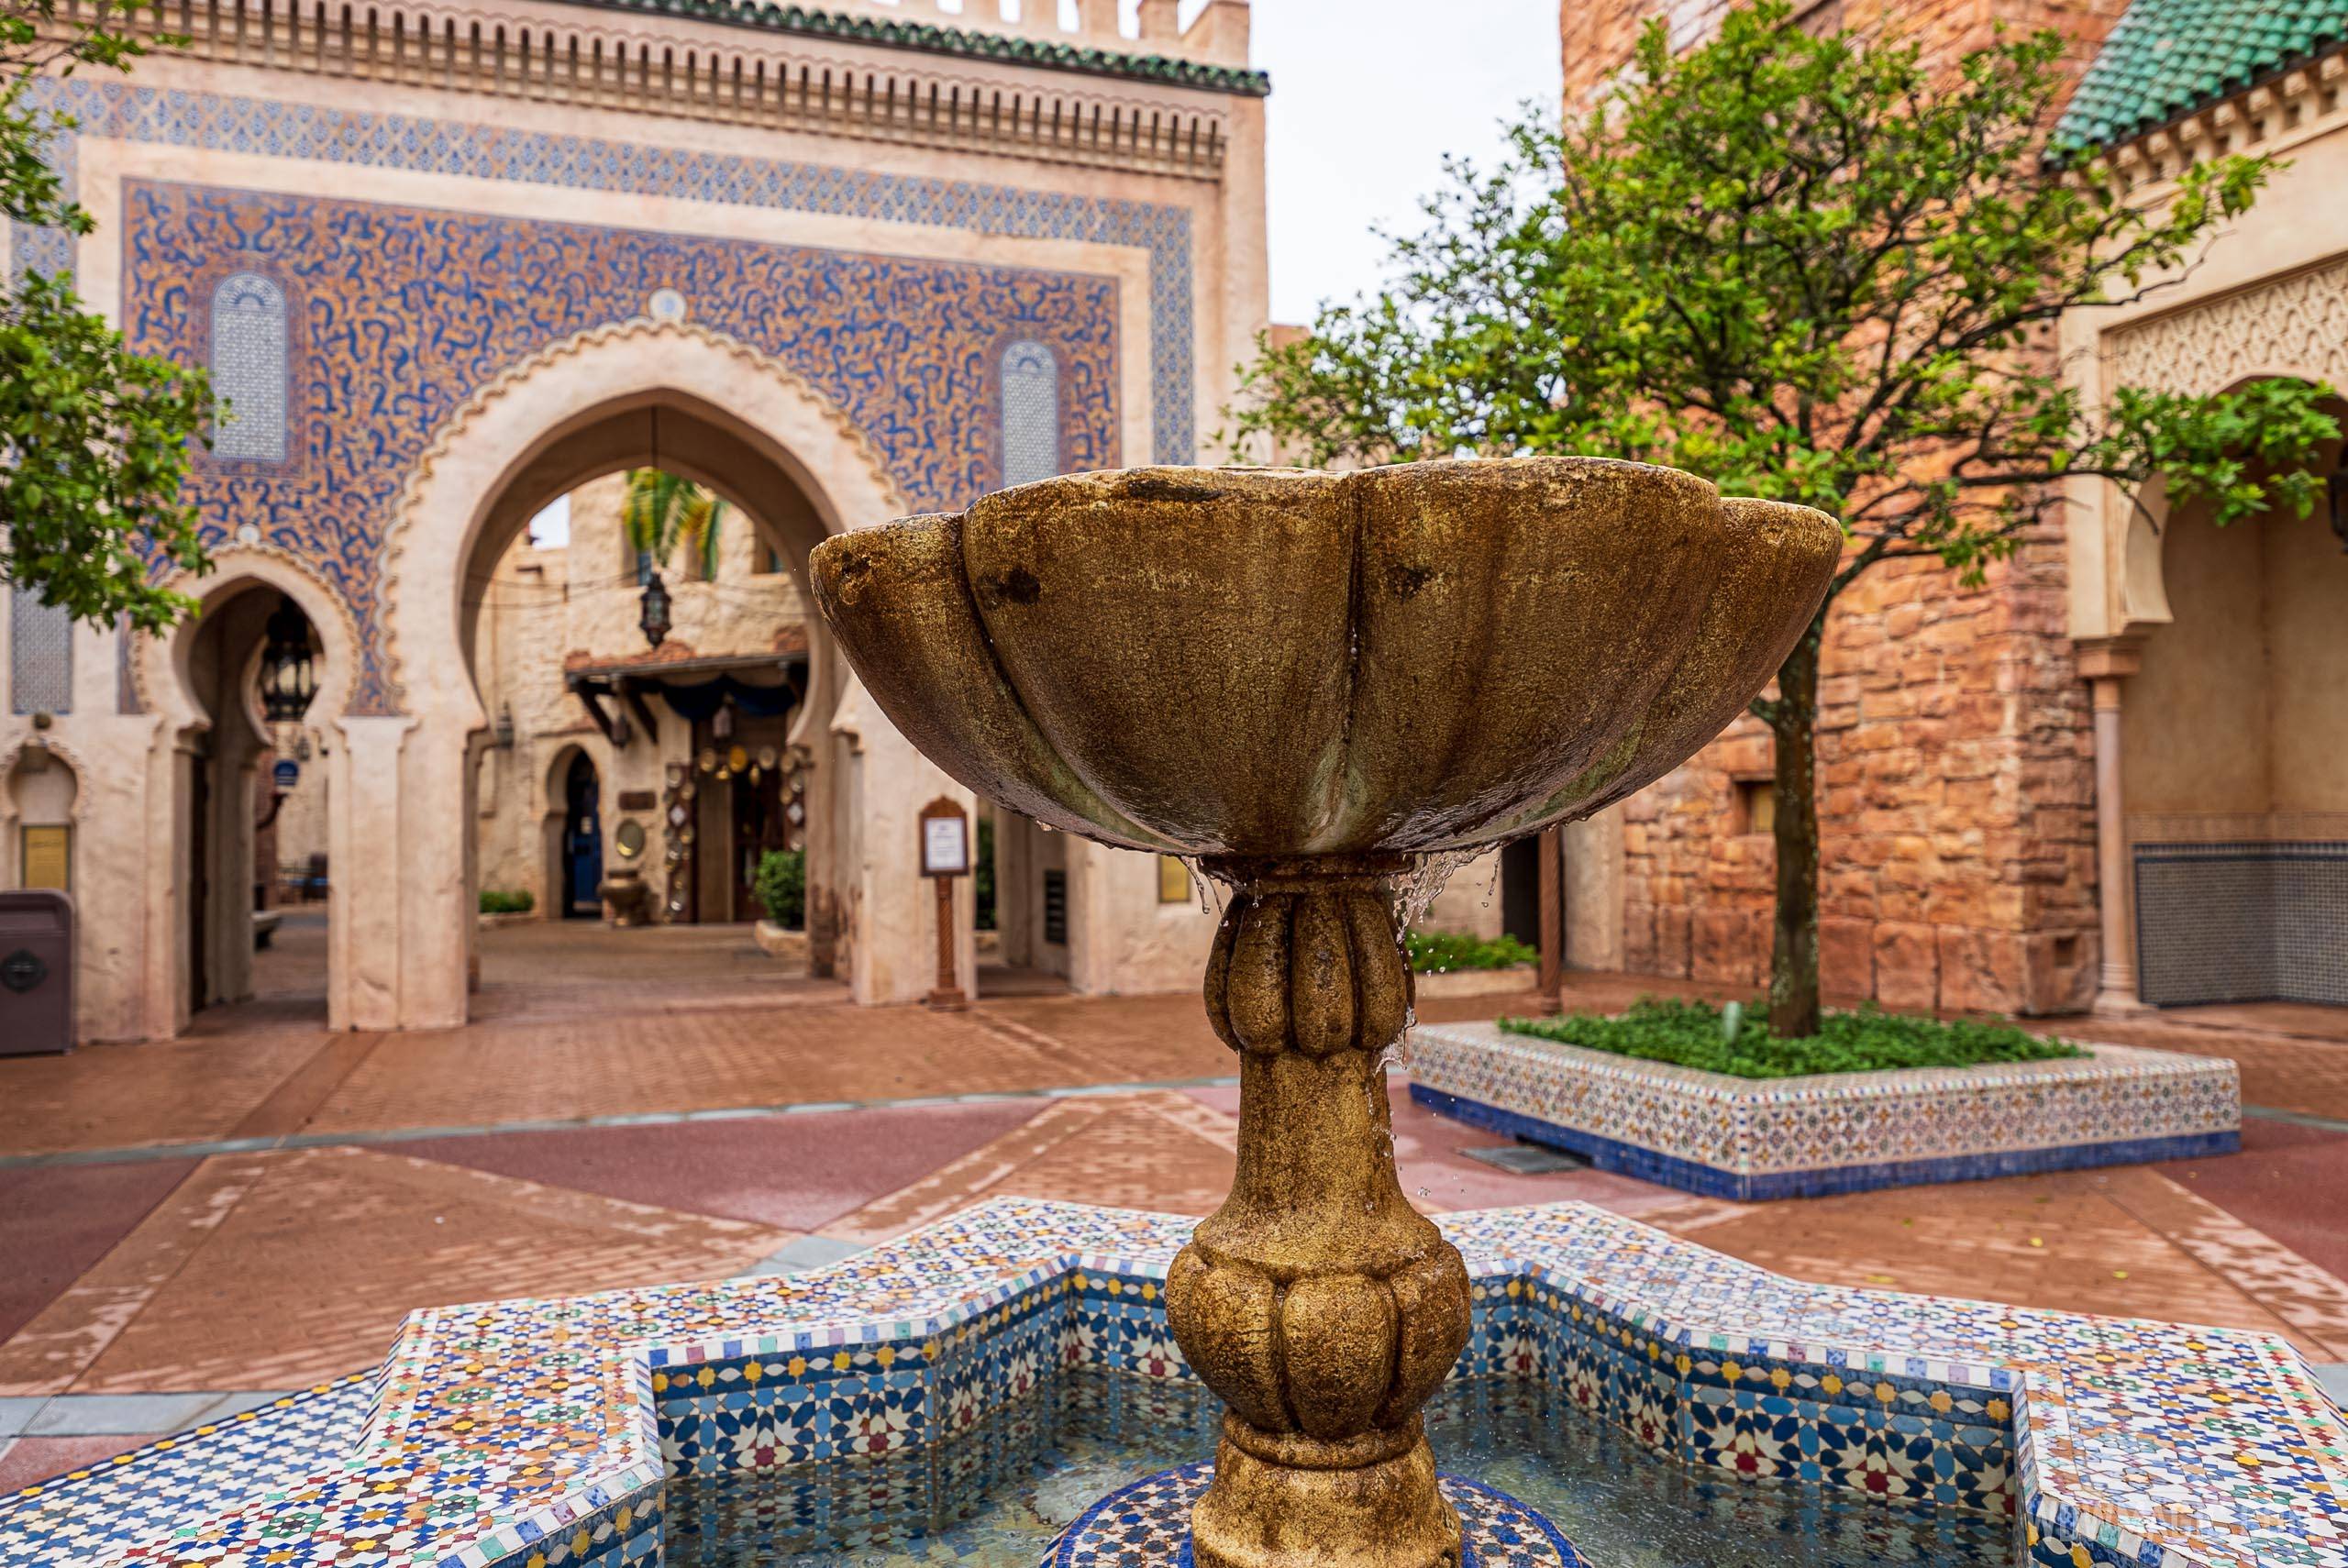 Morocco pavilion central courtyard reopens - July 6 2021